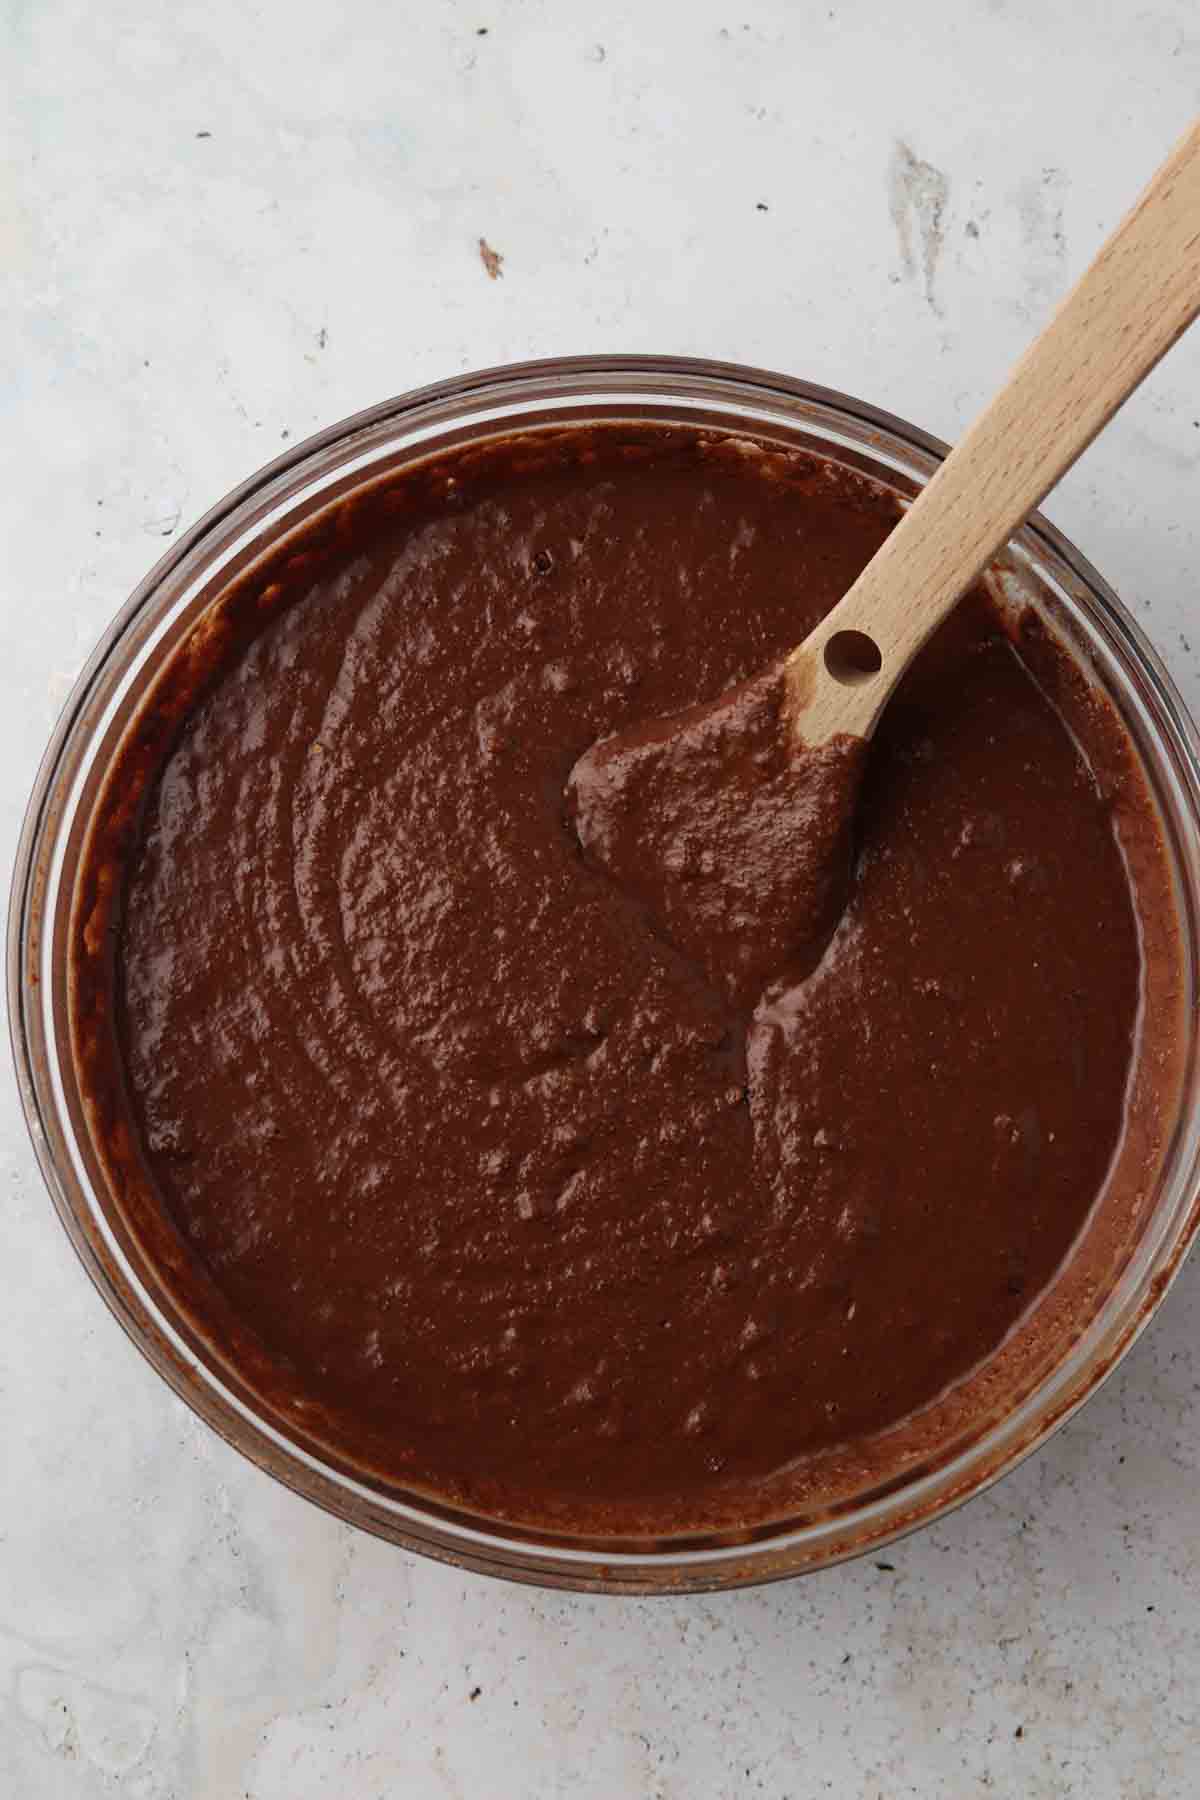 Wet chocolate cake ingredients mixed with dry chocolate cake ingredients. 